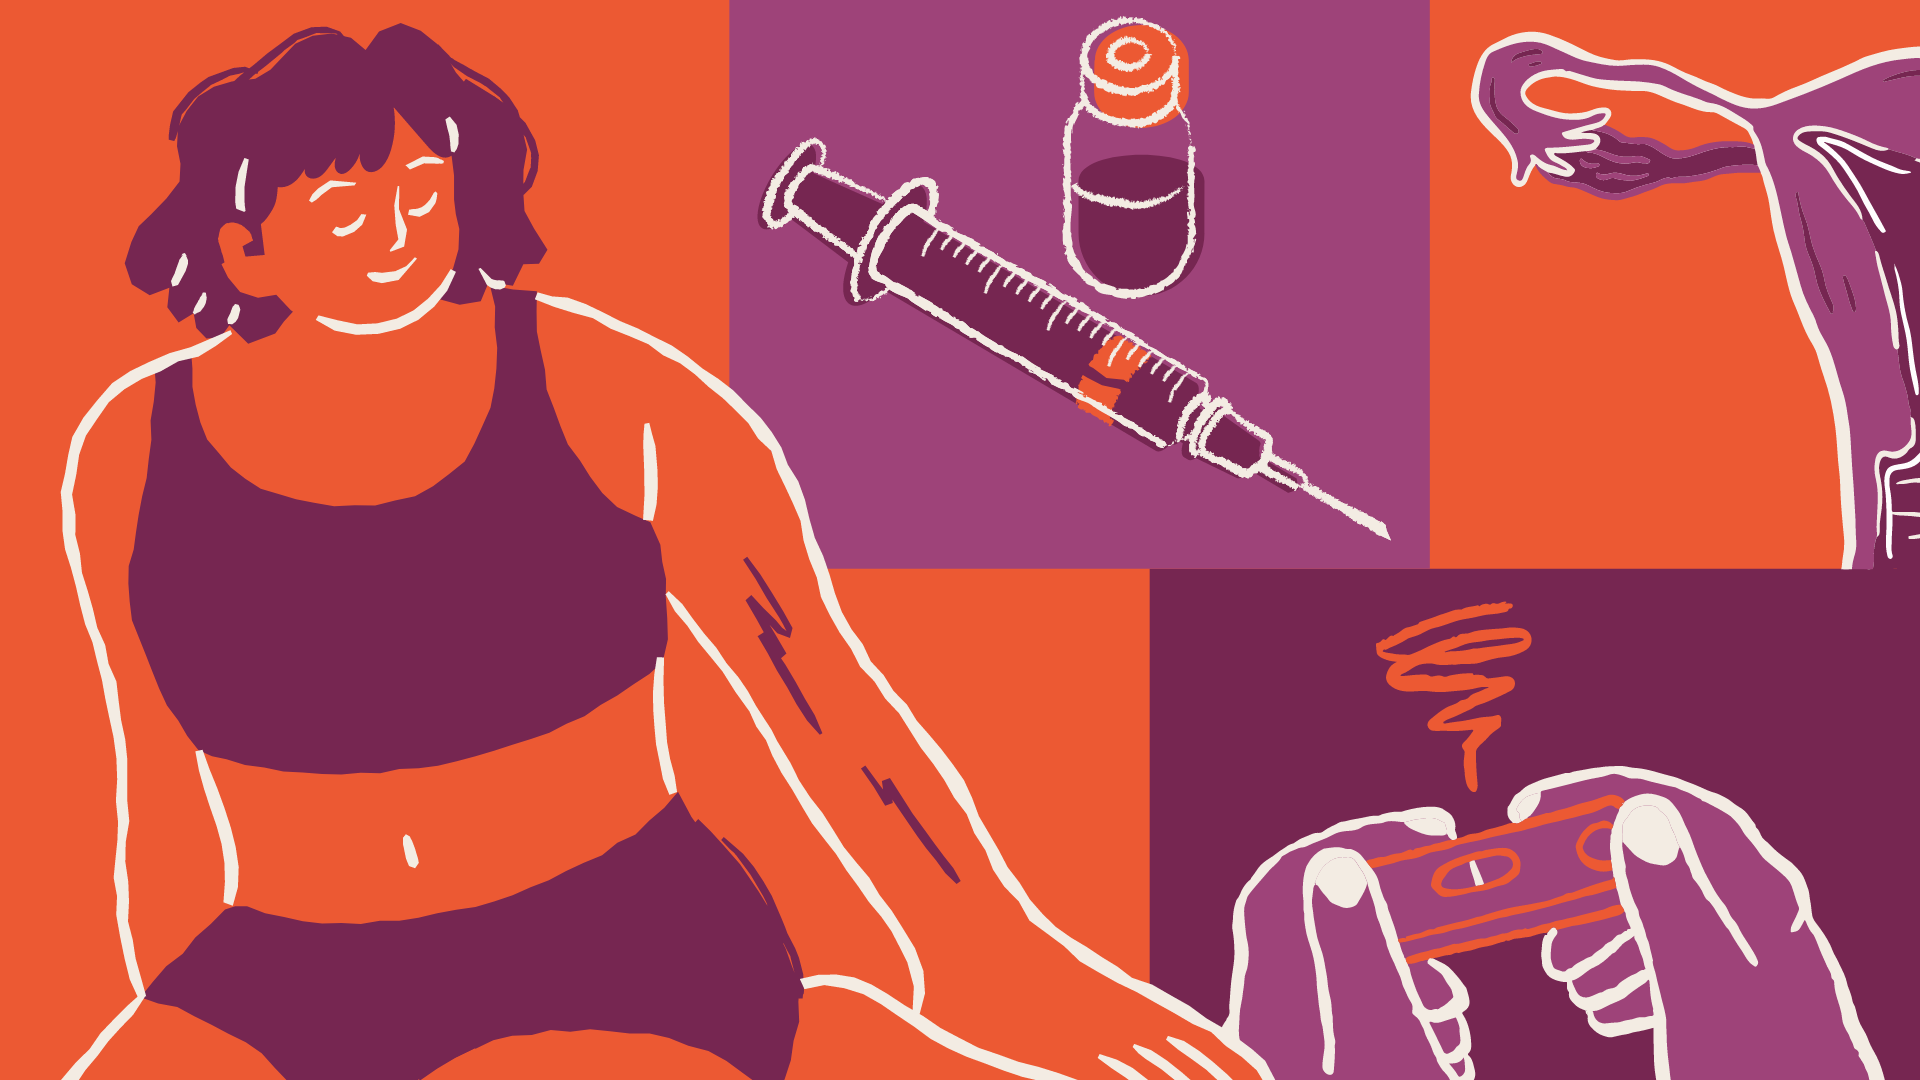 A guide to Kindred’s Injectable Contraceptive in the Philippines